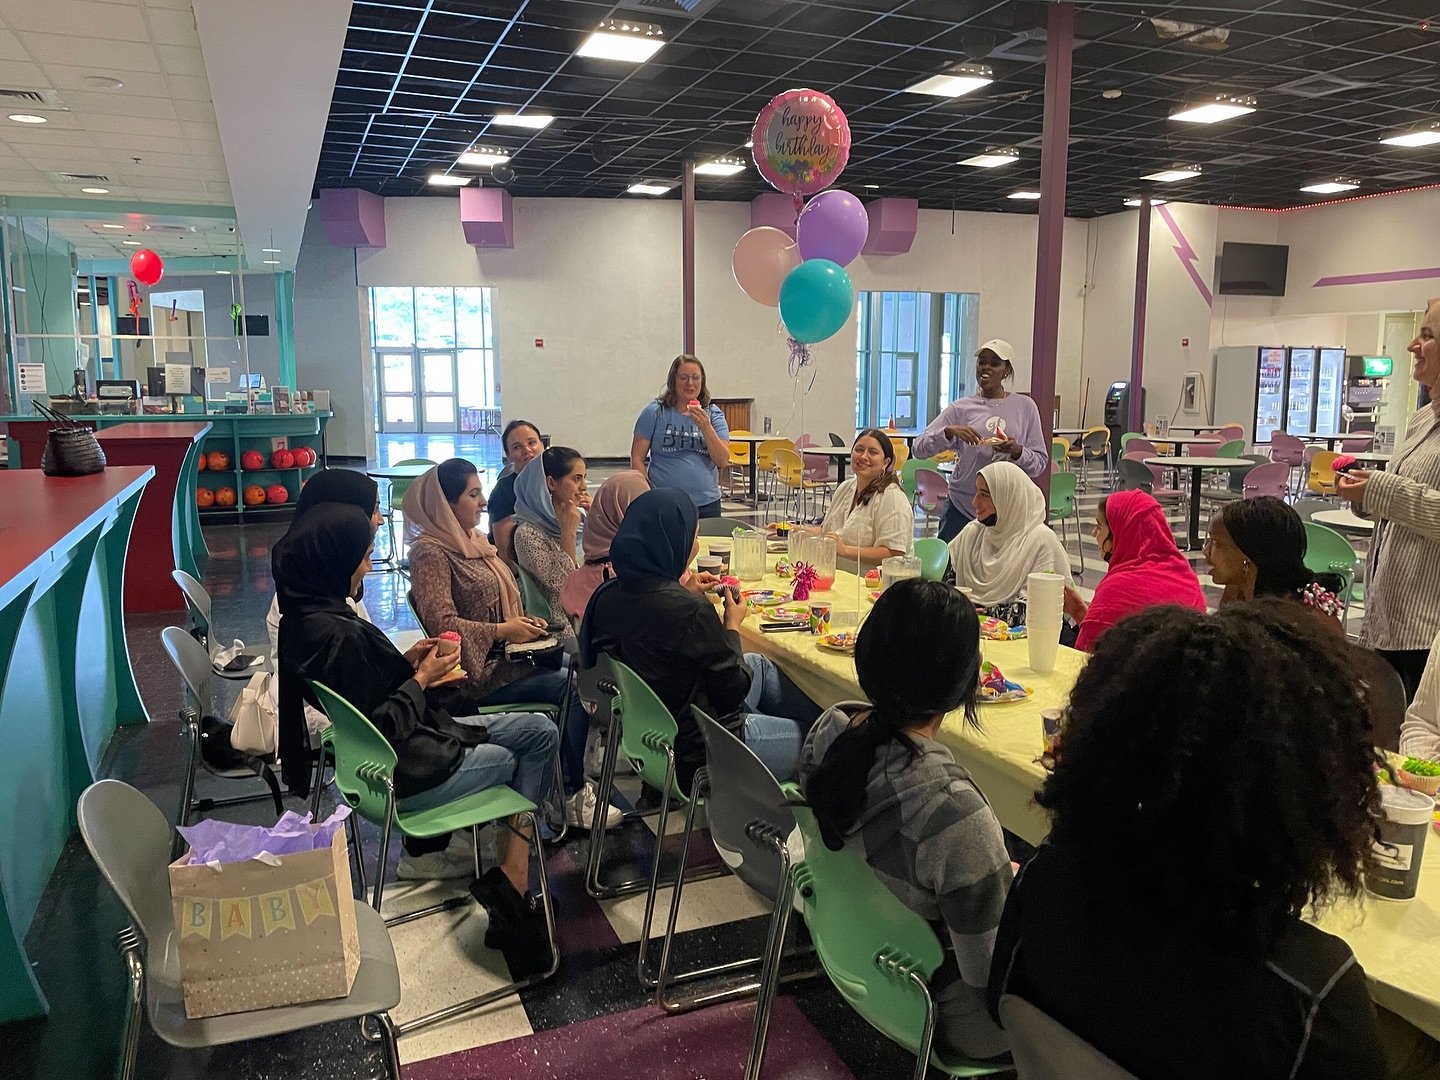 It&rsquo;s always a party in Austin 🎉💕 Our Senior Program Manager Becky shared that one of the highlights during bowling night was &ldquo;getting to sing Happy Birthday in SIX languages to Uzma and Fatima! English, Pashto, Dari, Arabic, Kinyarwanda